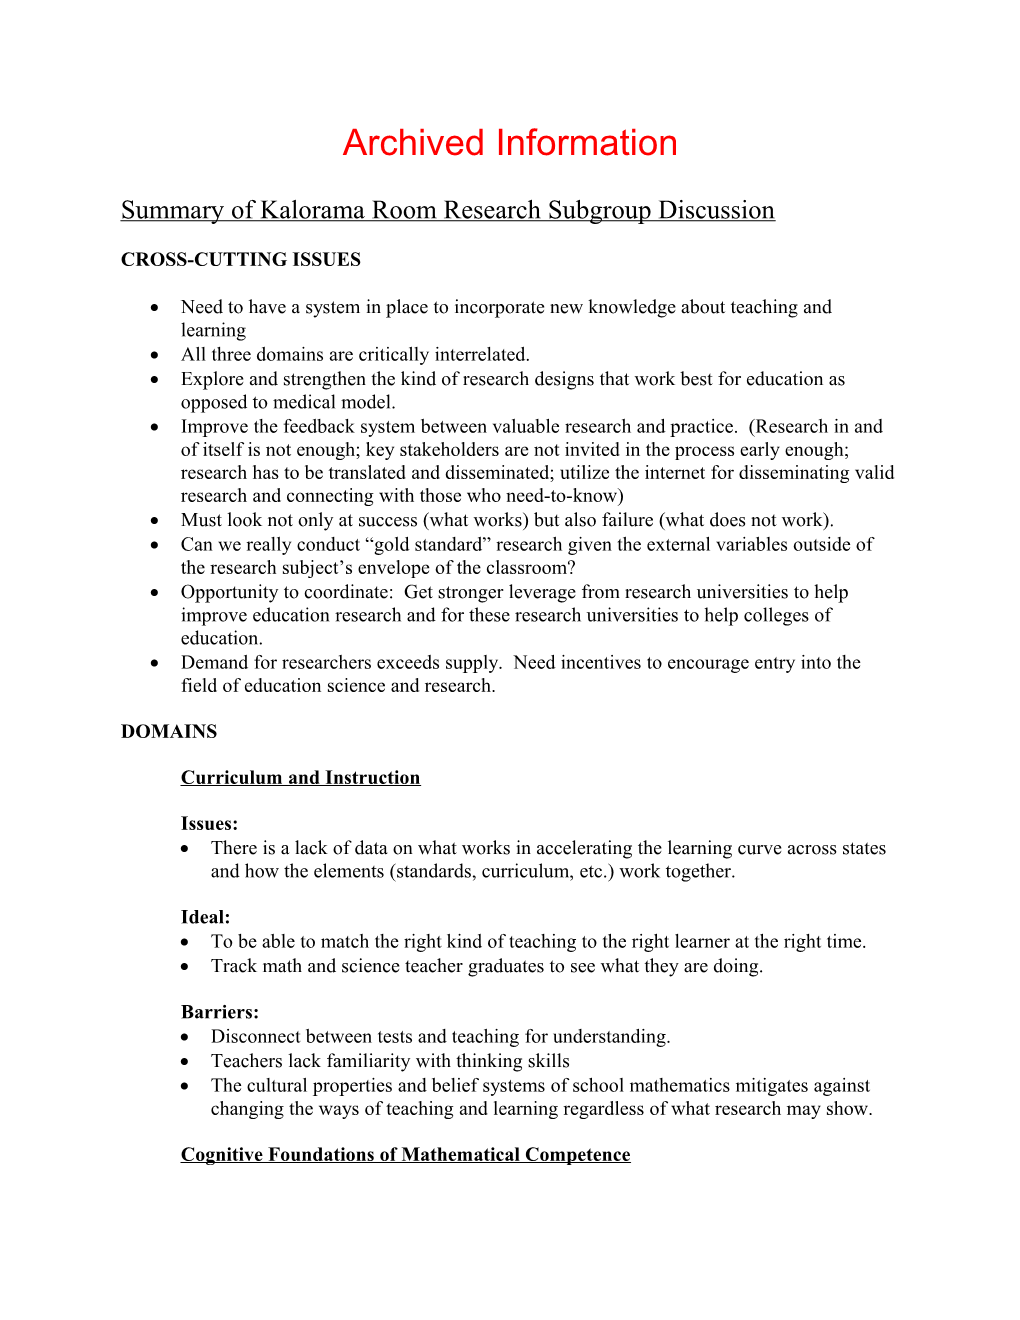 Archived - Research Notes from Group 3 (Msword)